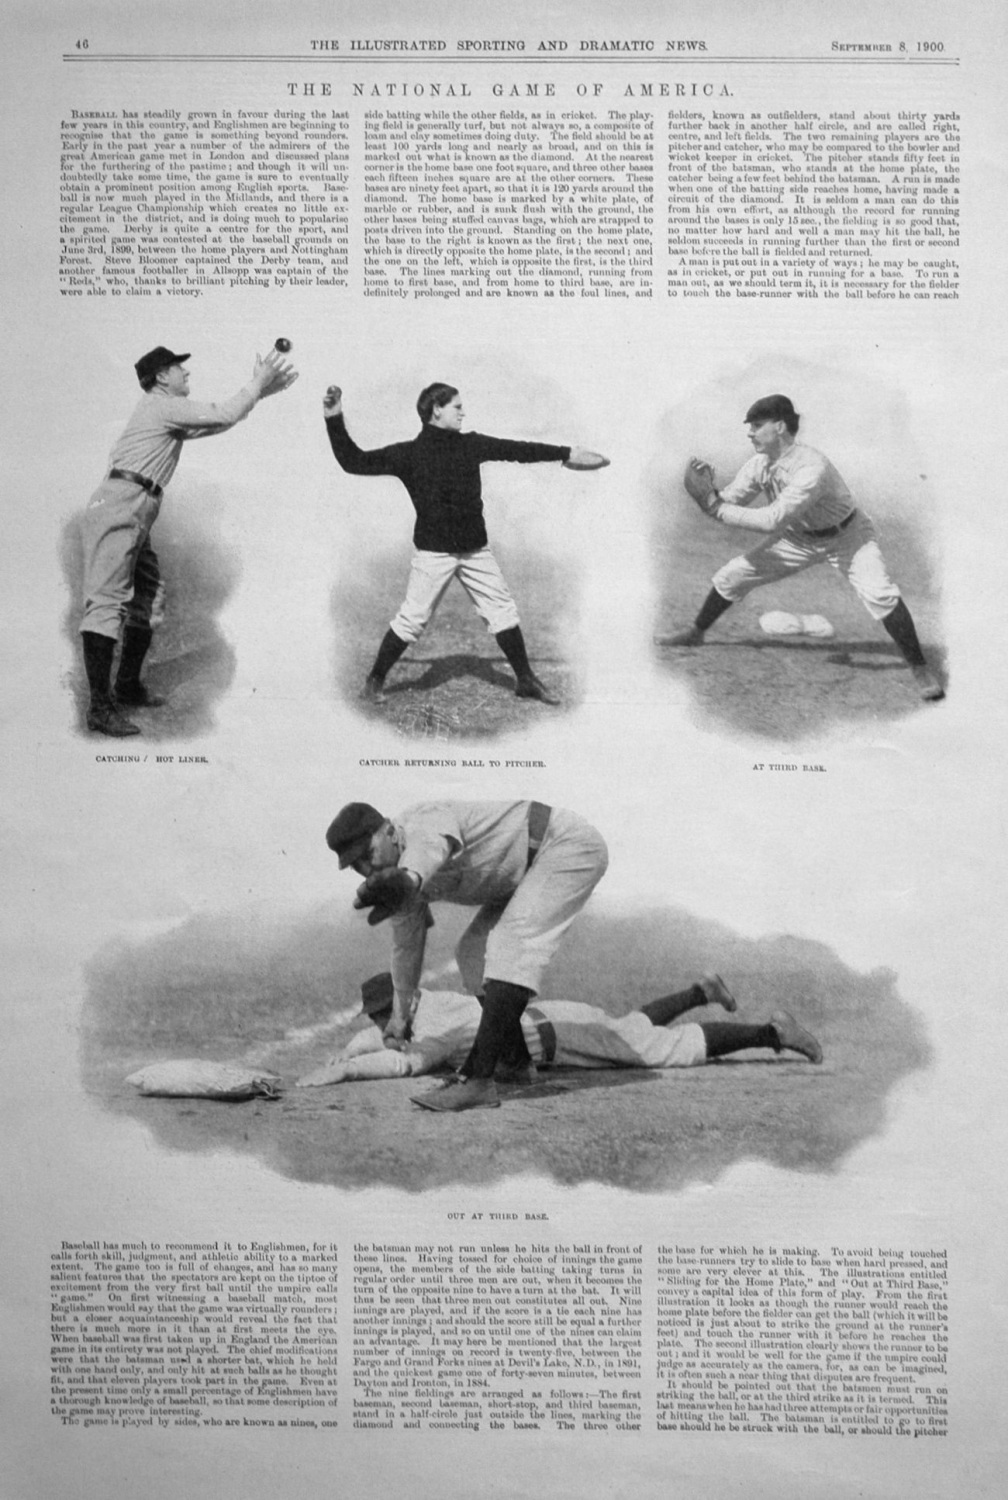 The National Game of America. 1900.